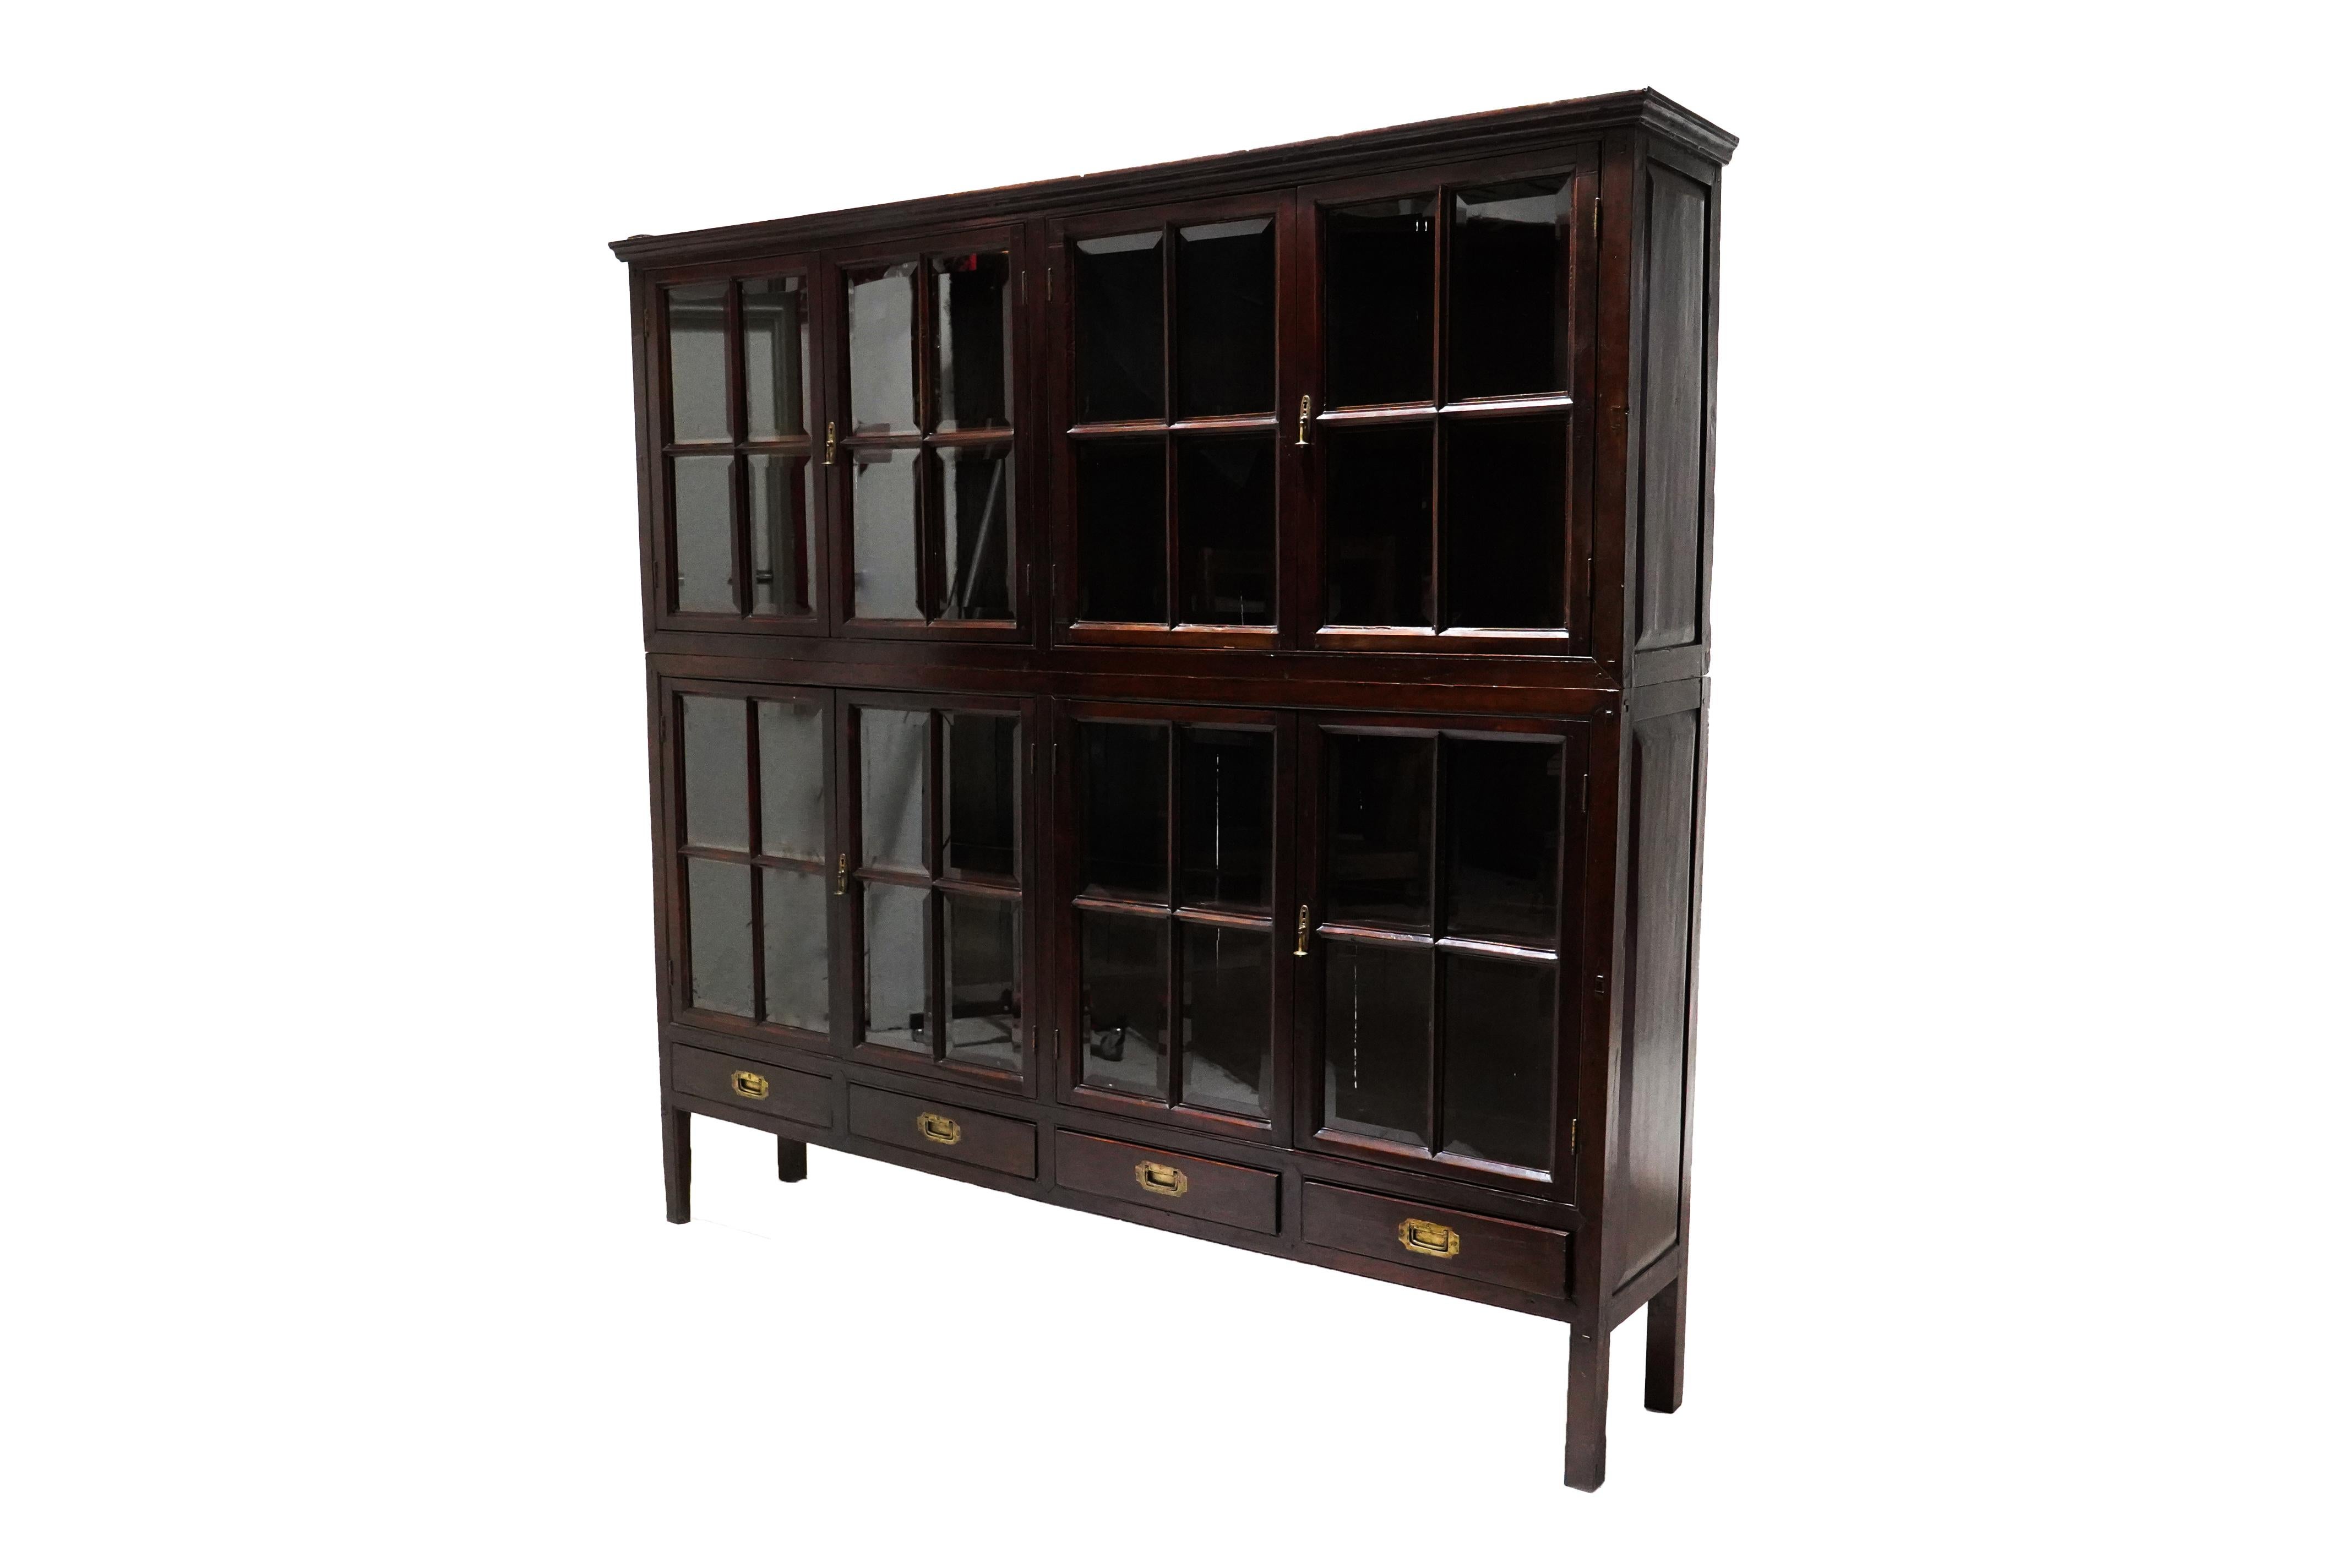 British Colonial An Authentic British-Colonial Bookcase Made From Teakwood